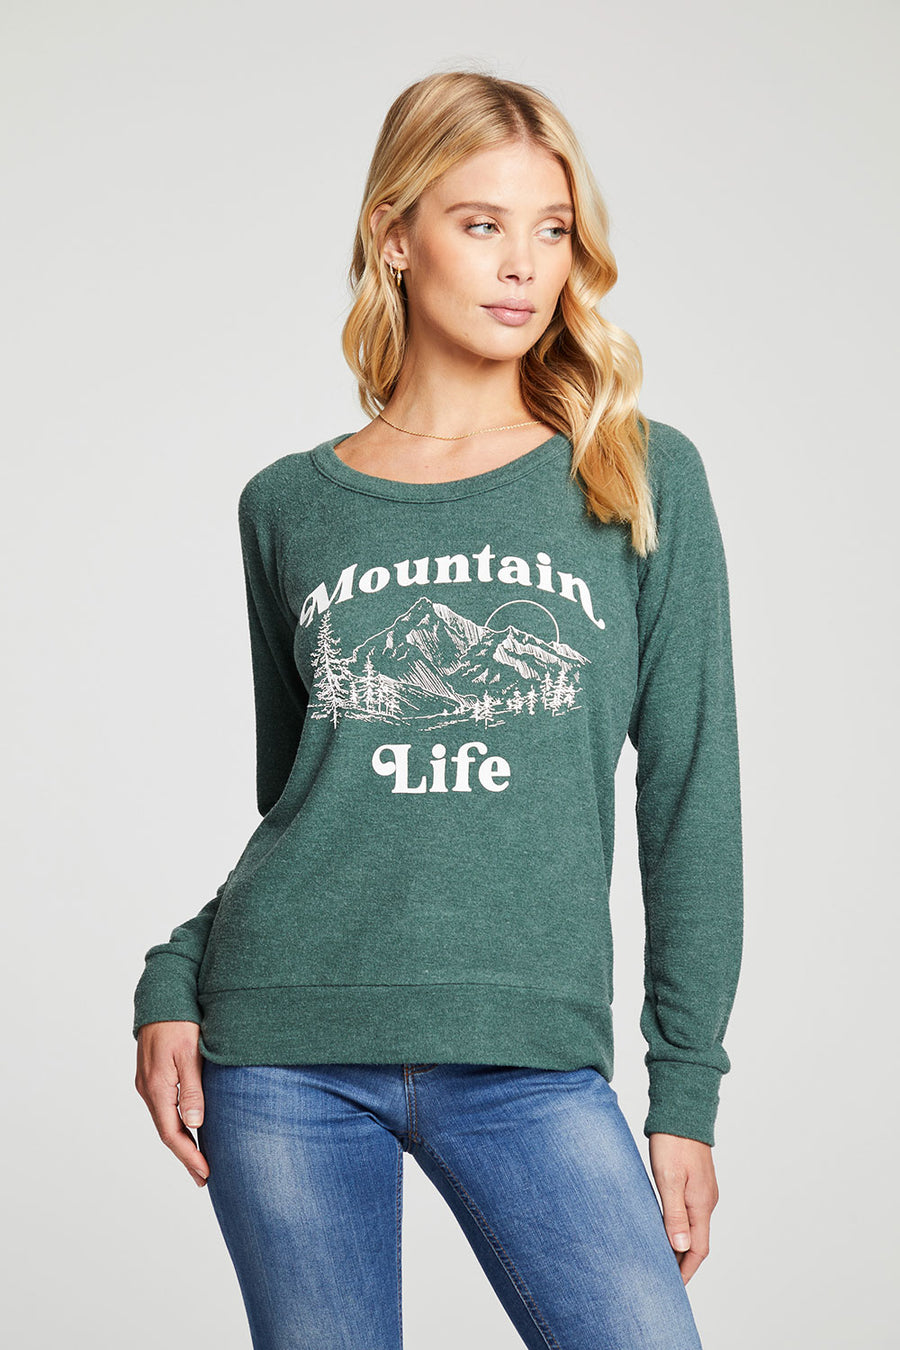 Mountain Wild Life WOMENS chaserbrand